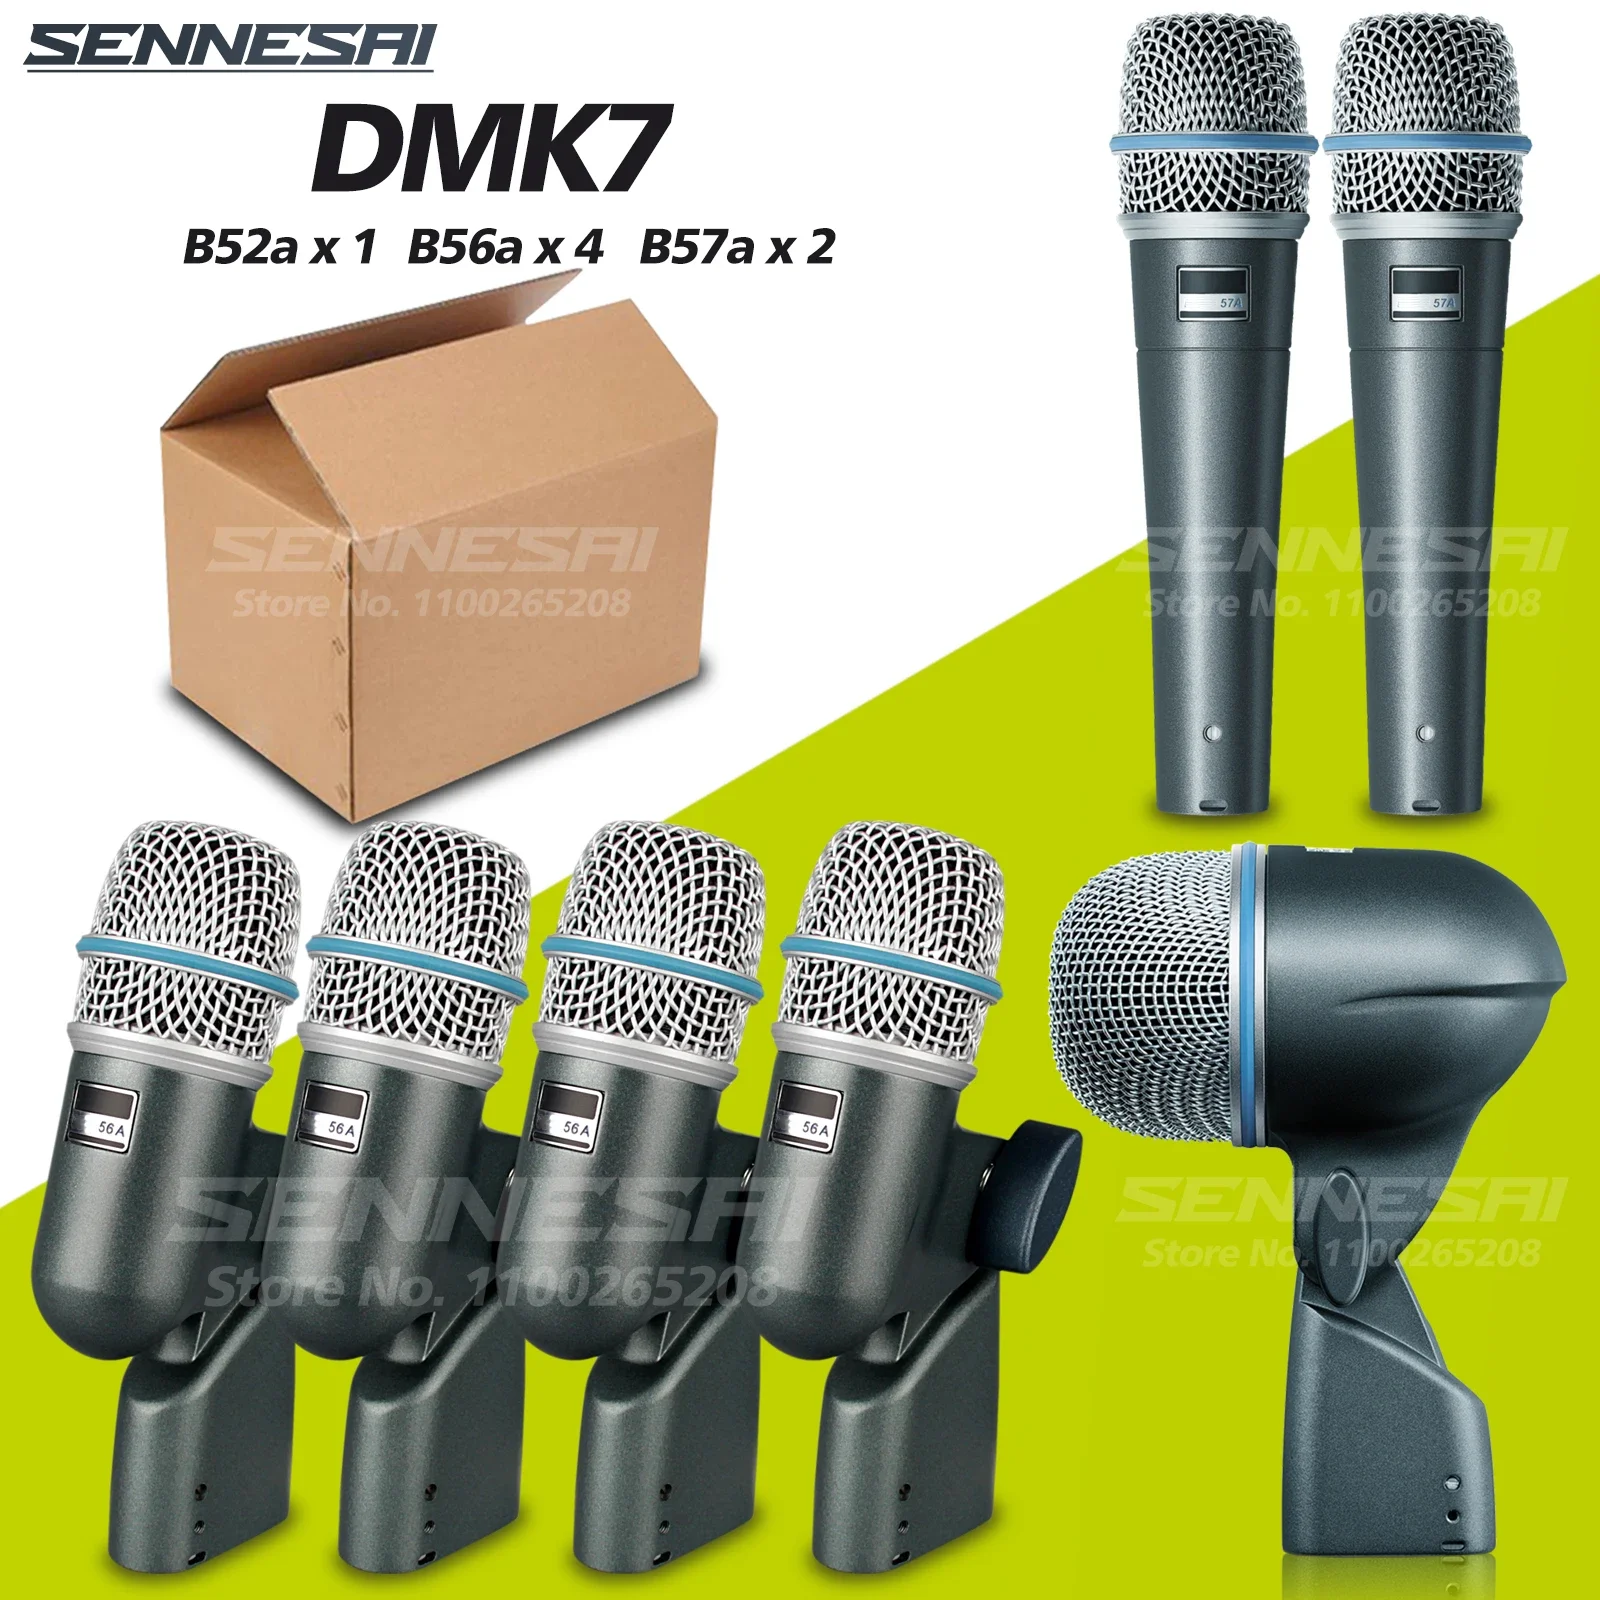 

SENNESAI BETA DMK7 7-Piece Wired Dynamic Drum Microphone (Whole Metal)- Kick Bass, Tom/Snare & Cymbals Mic Set-Use，52a 56a 57a